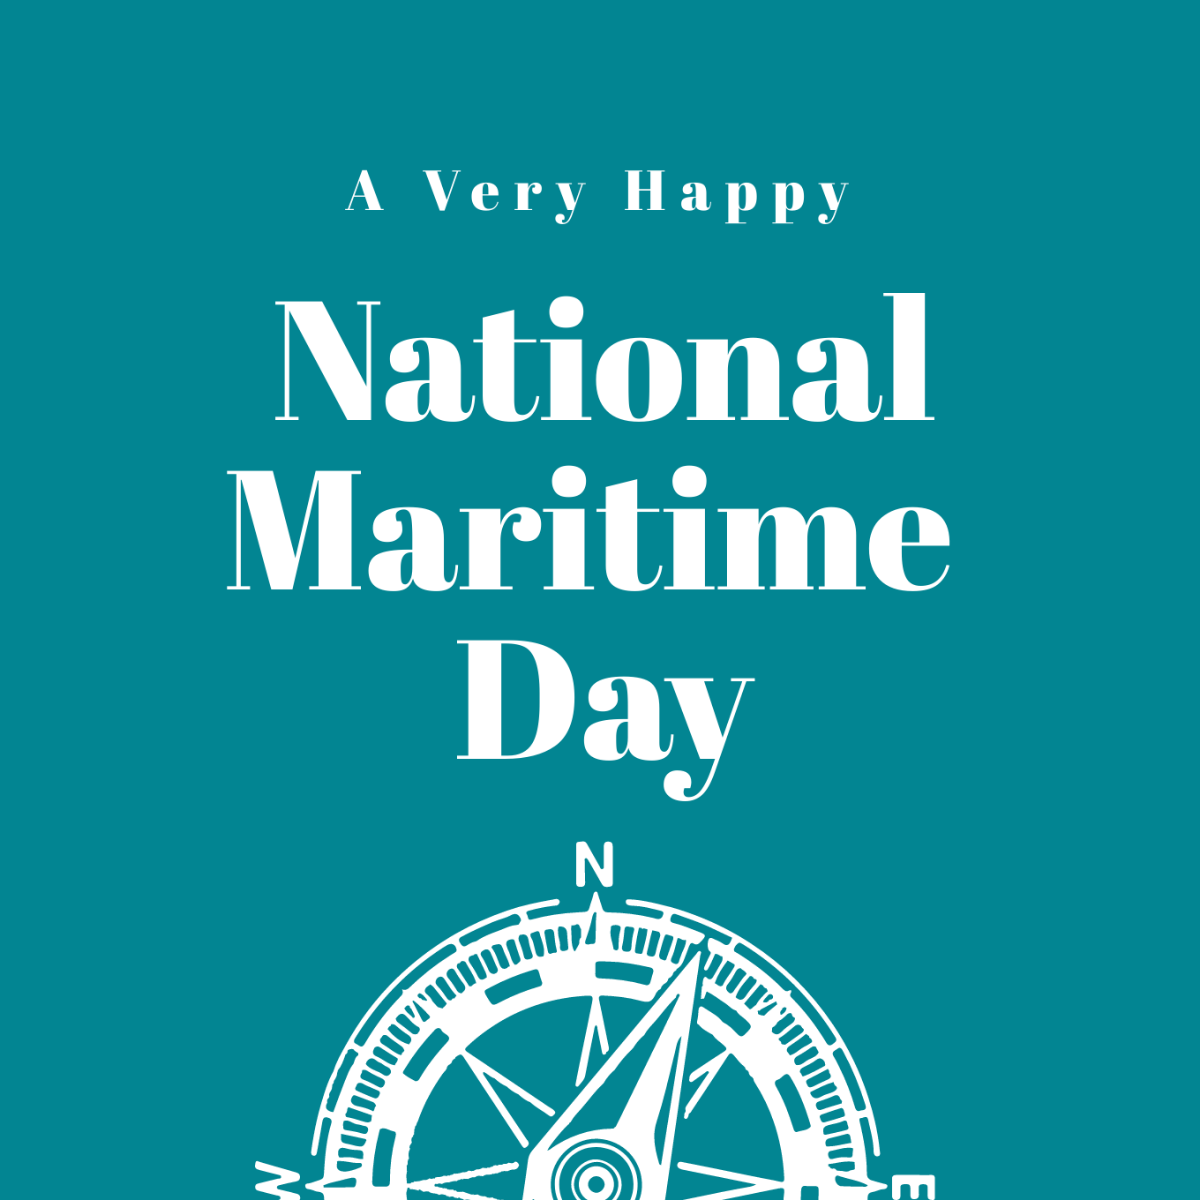 National Maritime Day Facebook Profile Photo Template